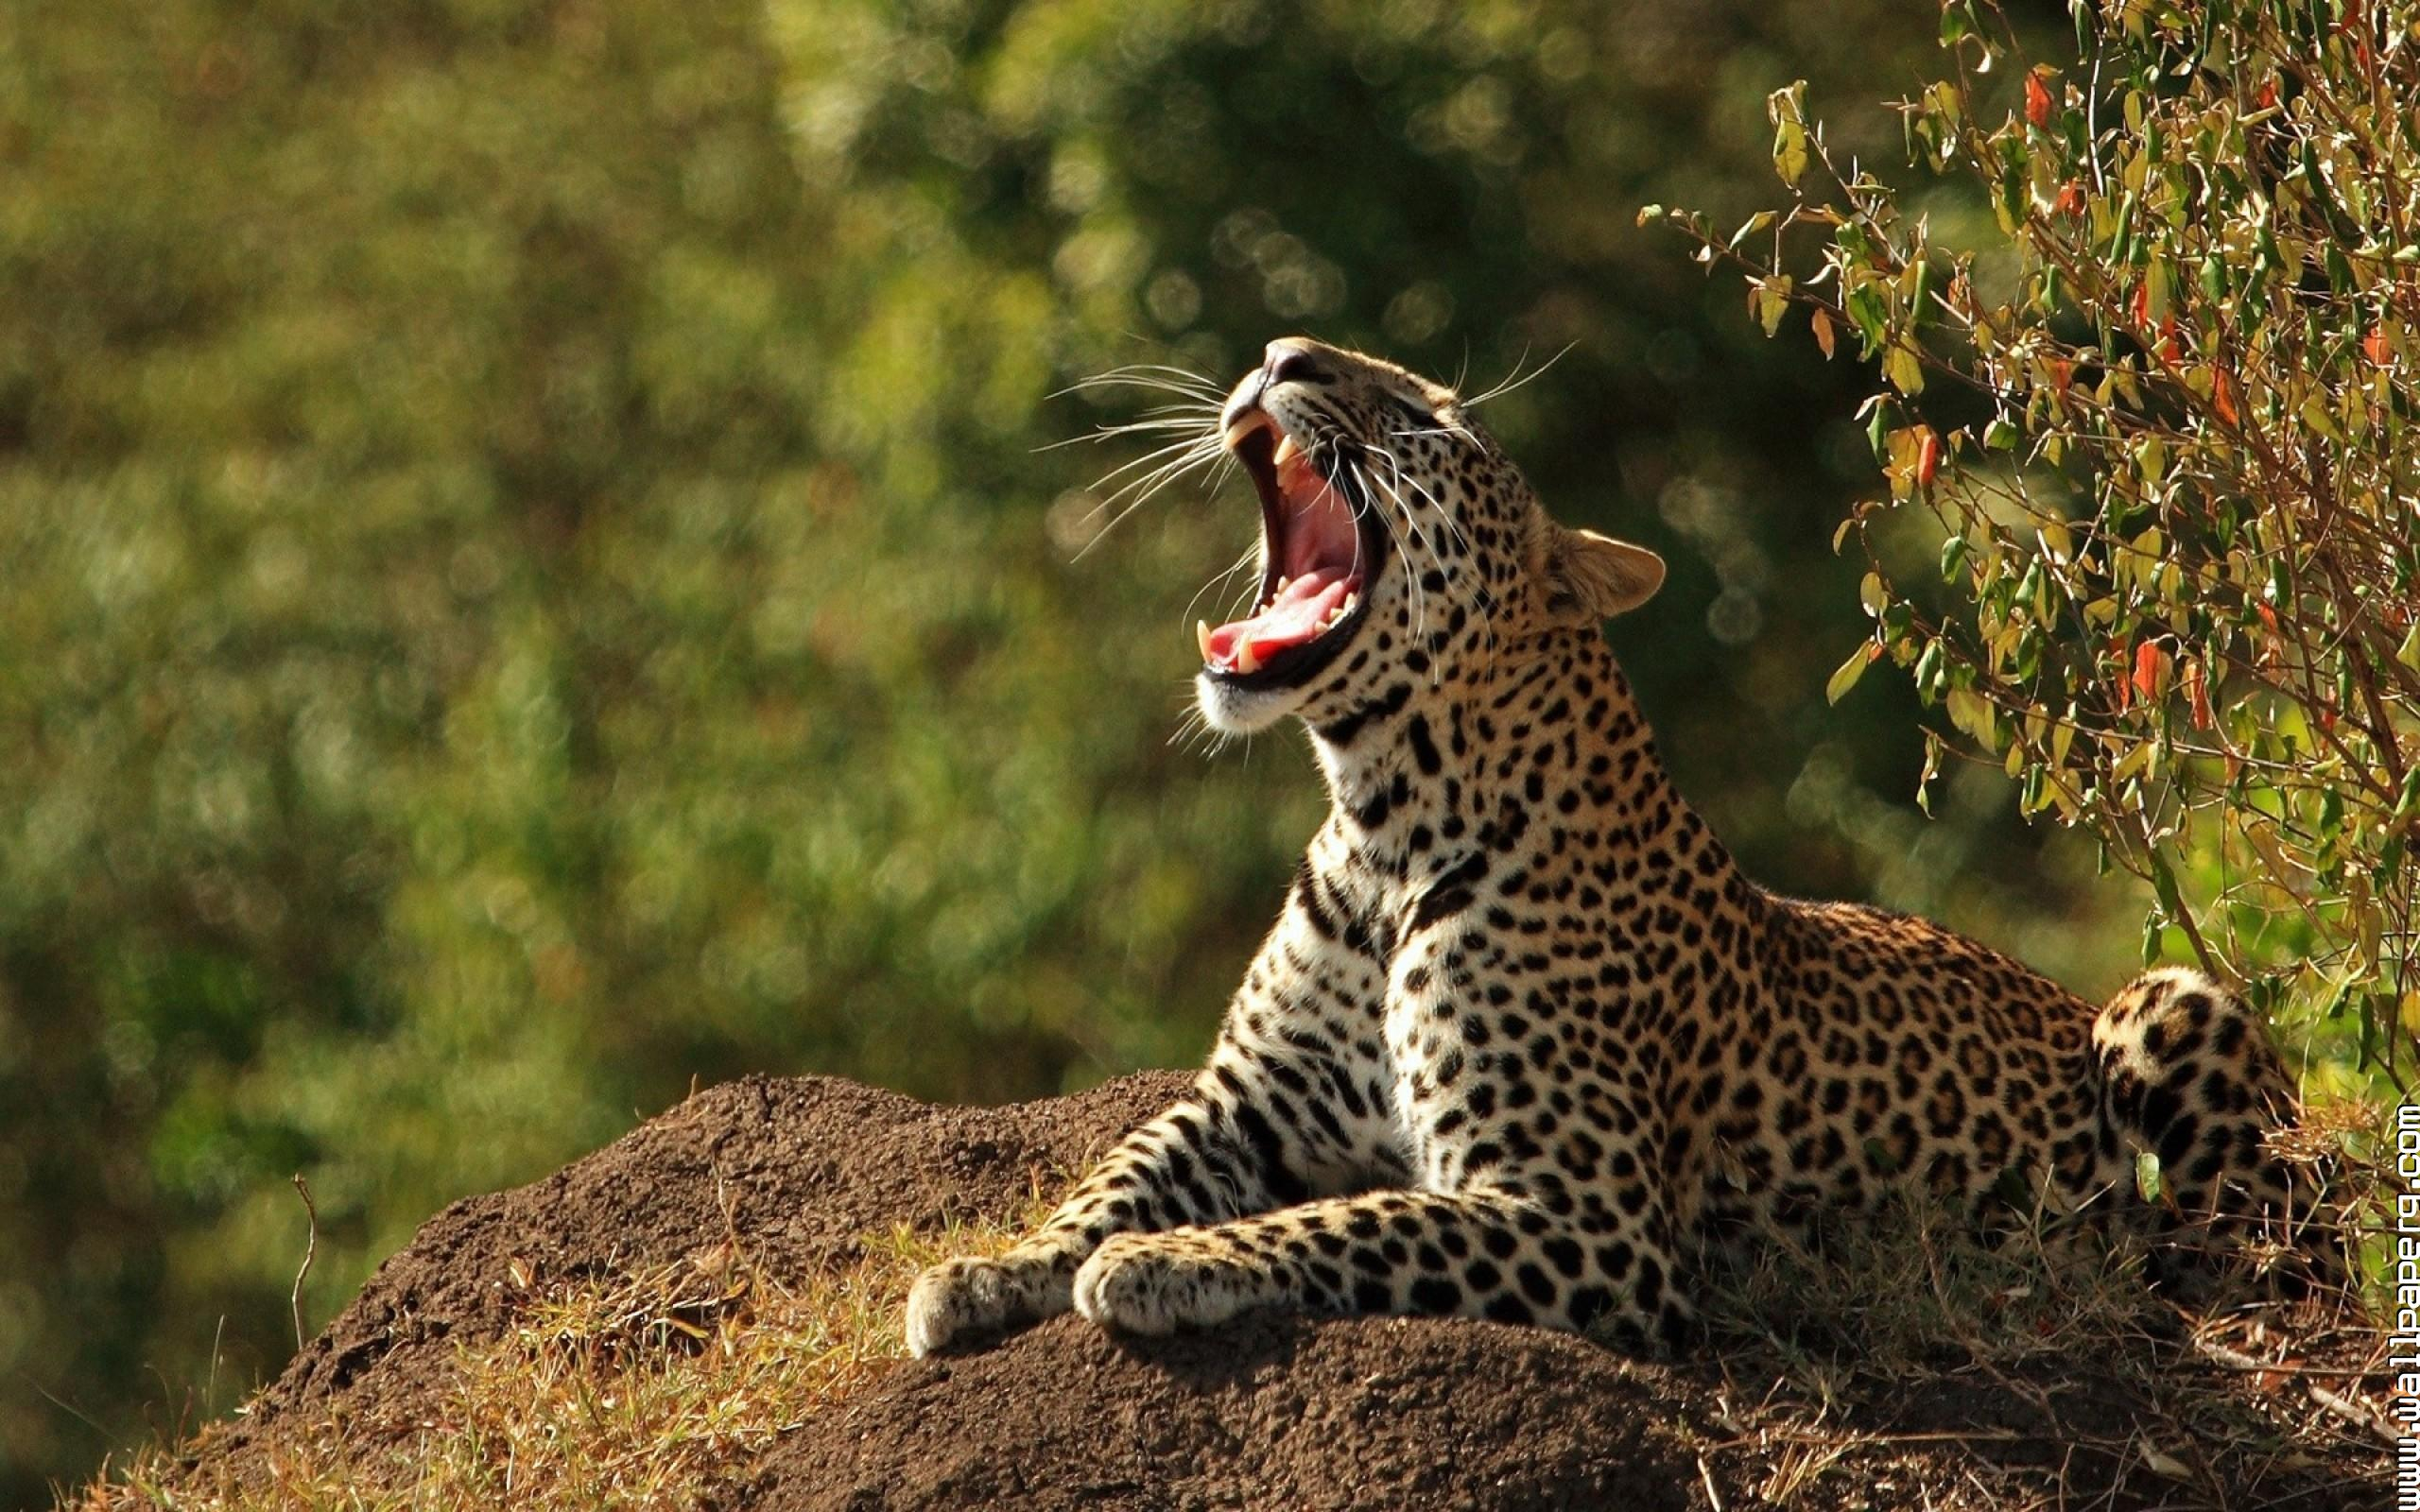 2560x1600 Download Animals leopards wild cats awesome wallpaper Wild animals for your mobile cell phone